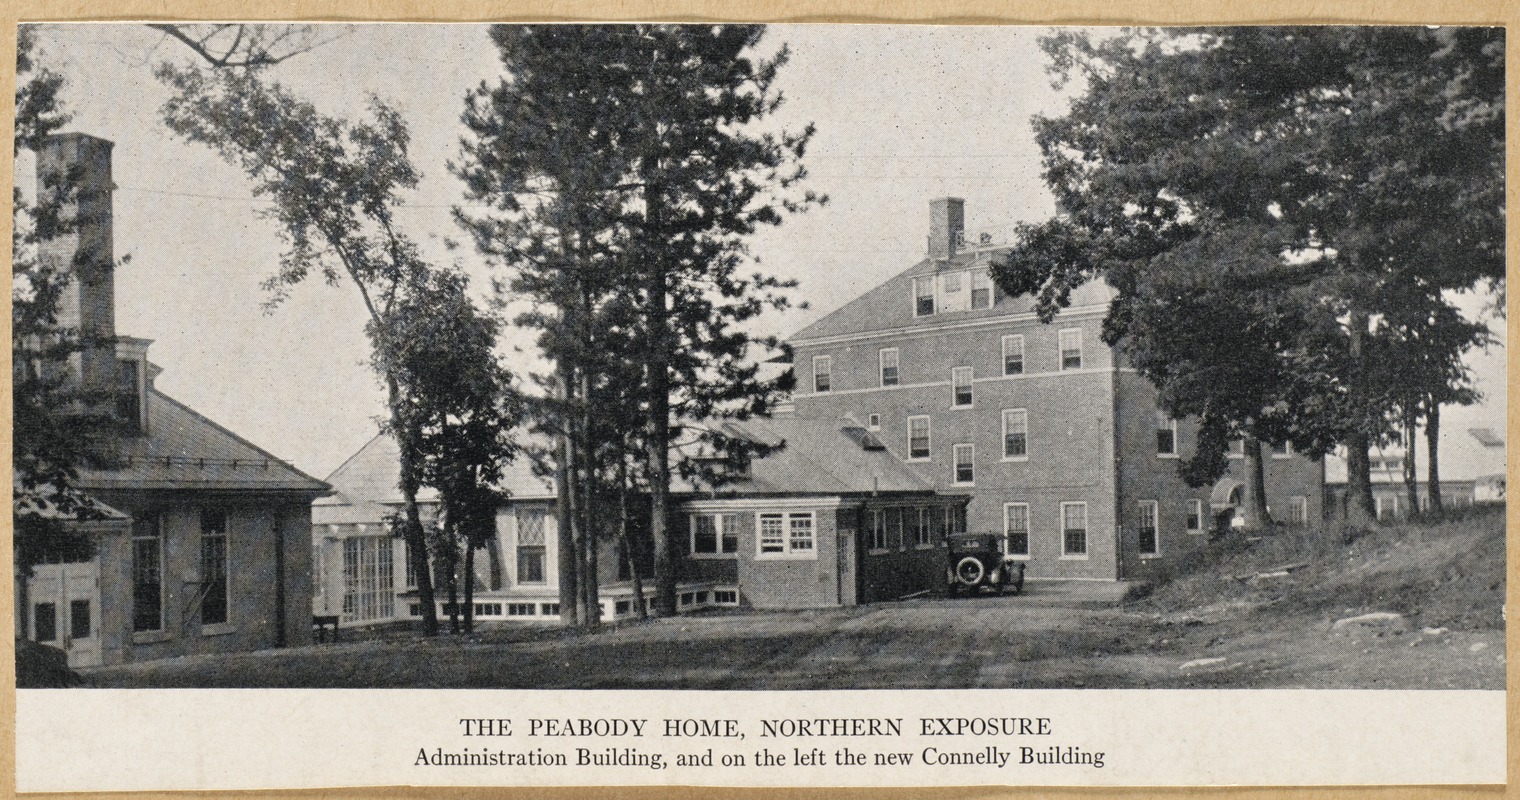 Villages of Newton, MA. Oak Hill. Peabody home, northern exposure, Adminsitration Building, Connelly Building